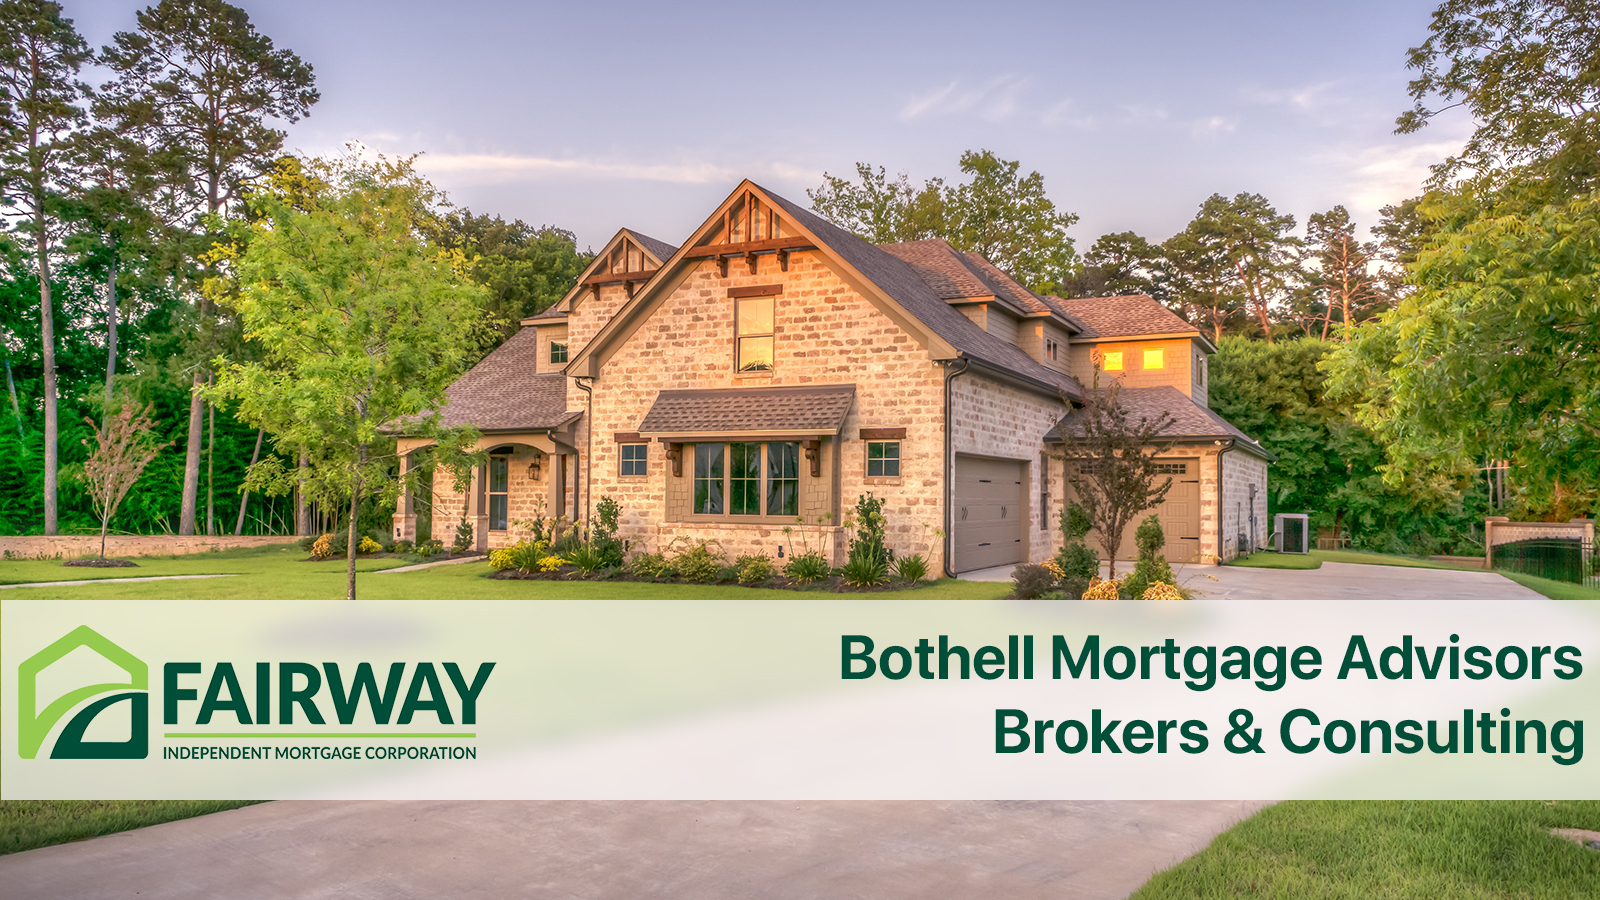 Bothell Mortgage Advisors, Brokers and Consulting